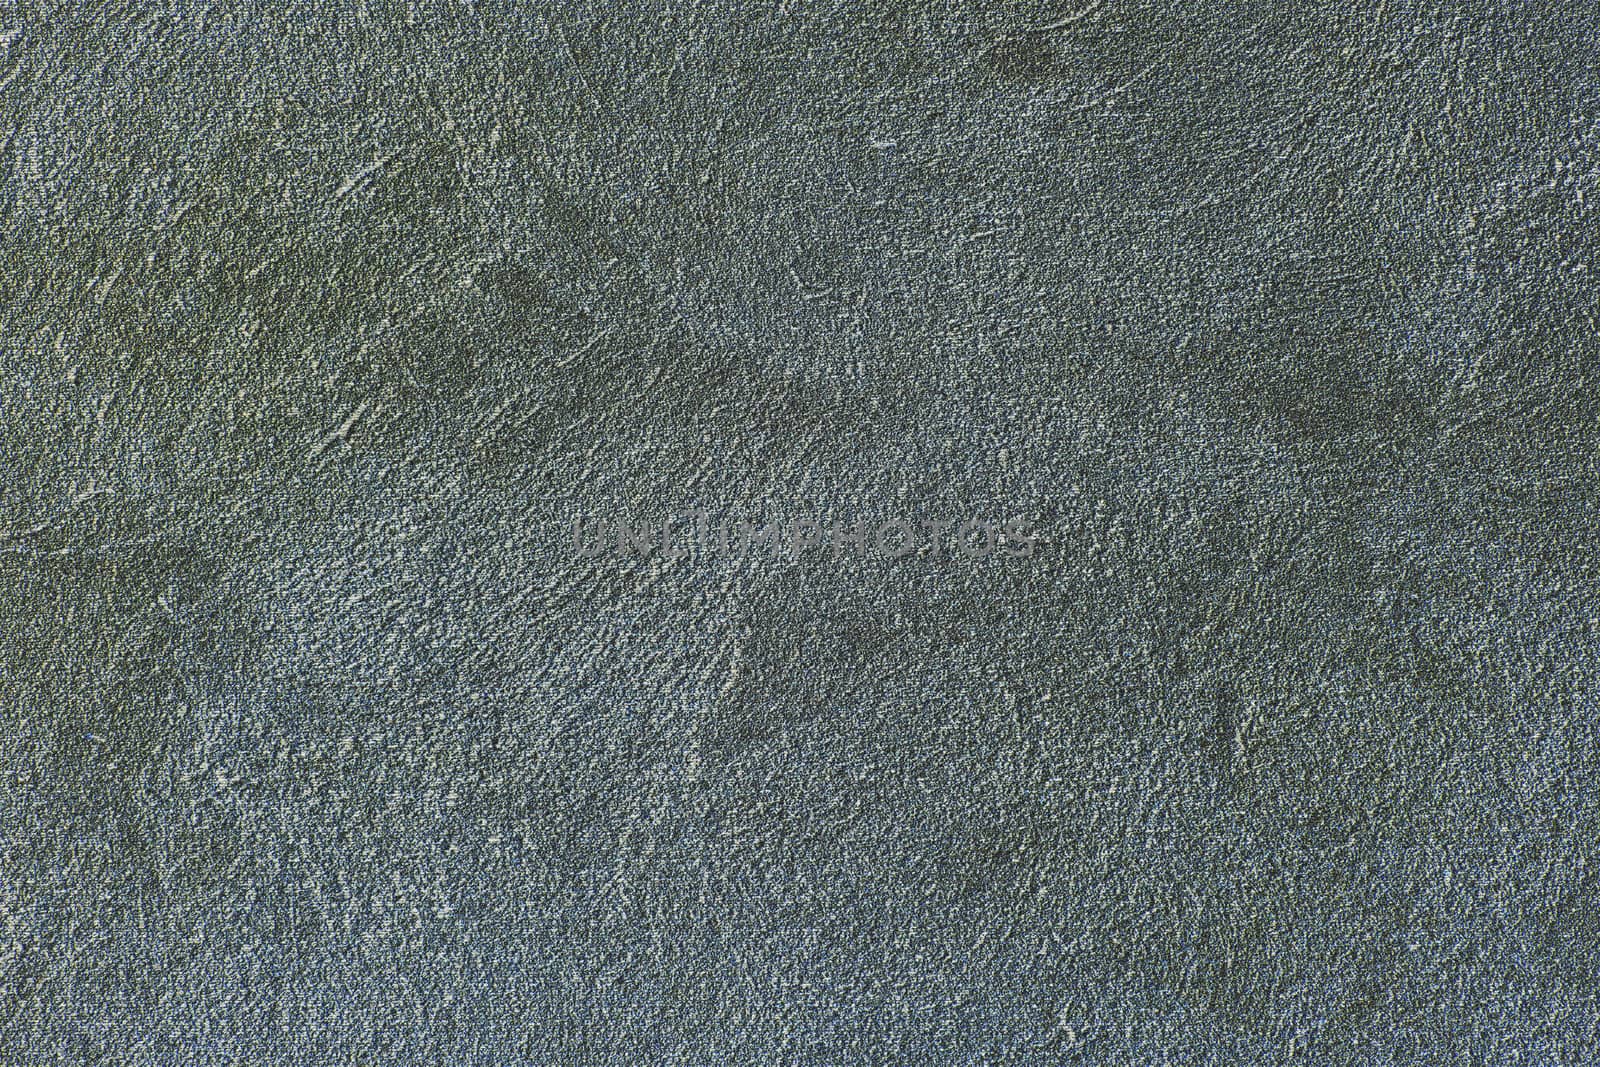 Concrete Wall Texture Background. Suitable for Backdrop, Wallpaper, and Decorative Design.